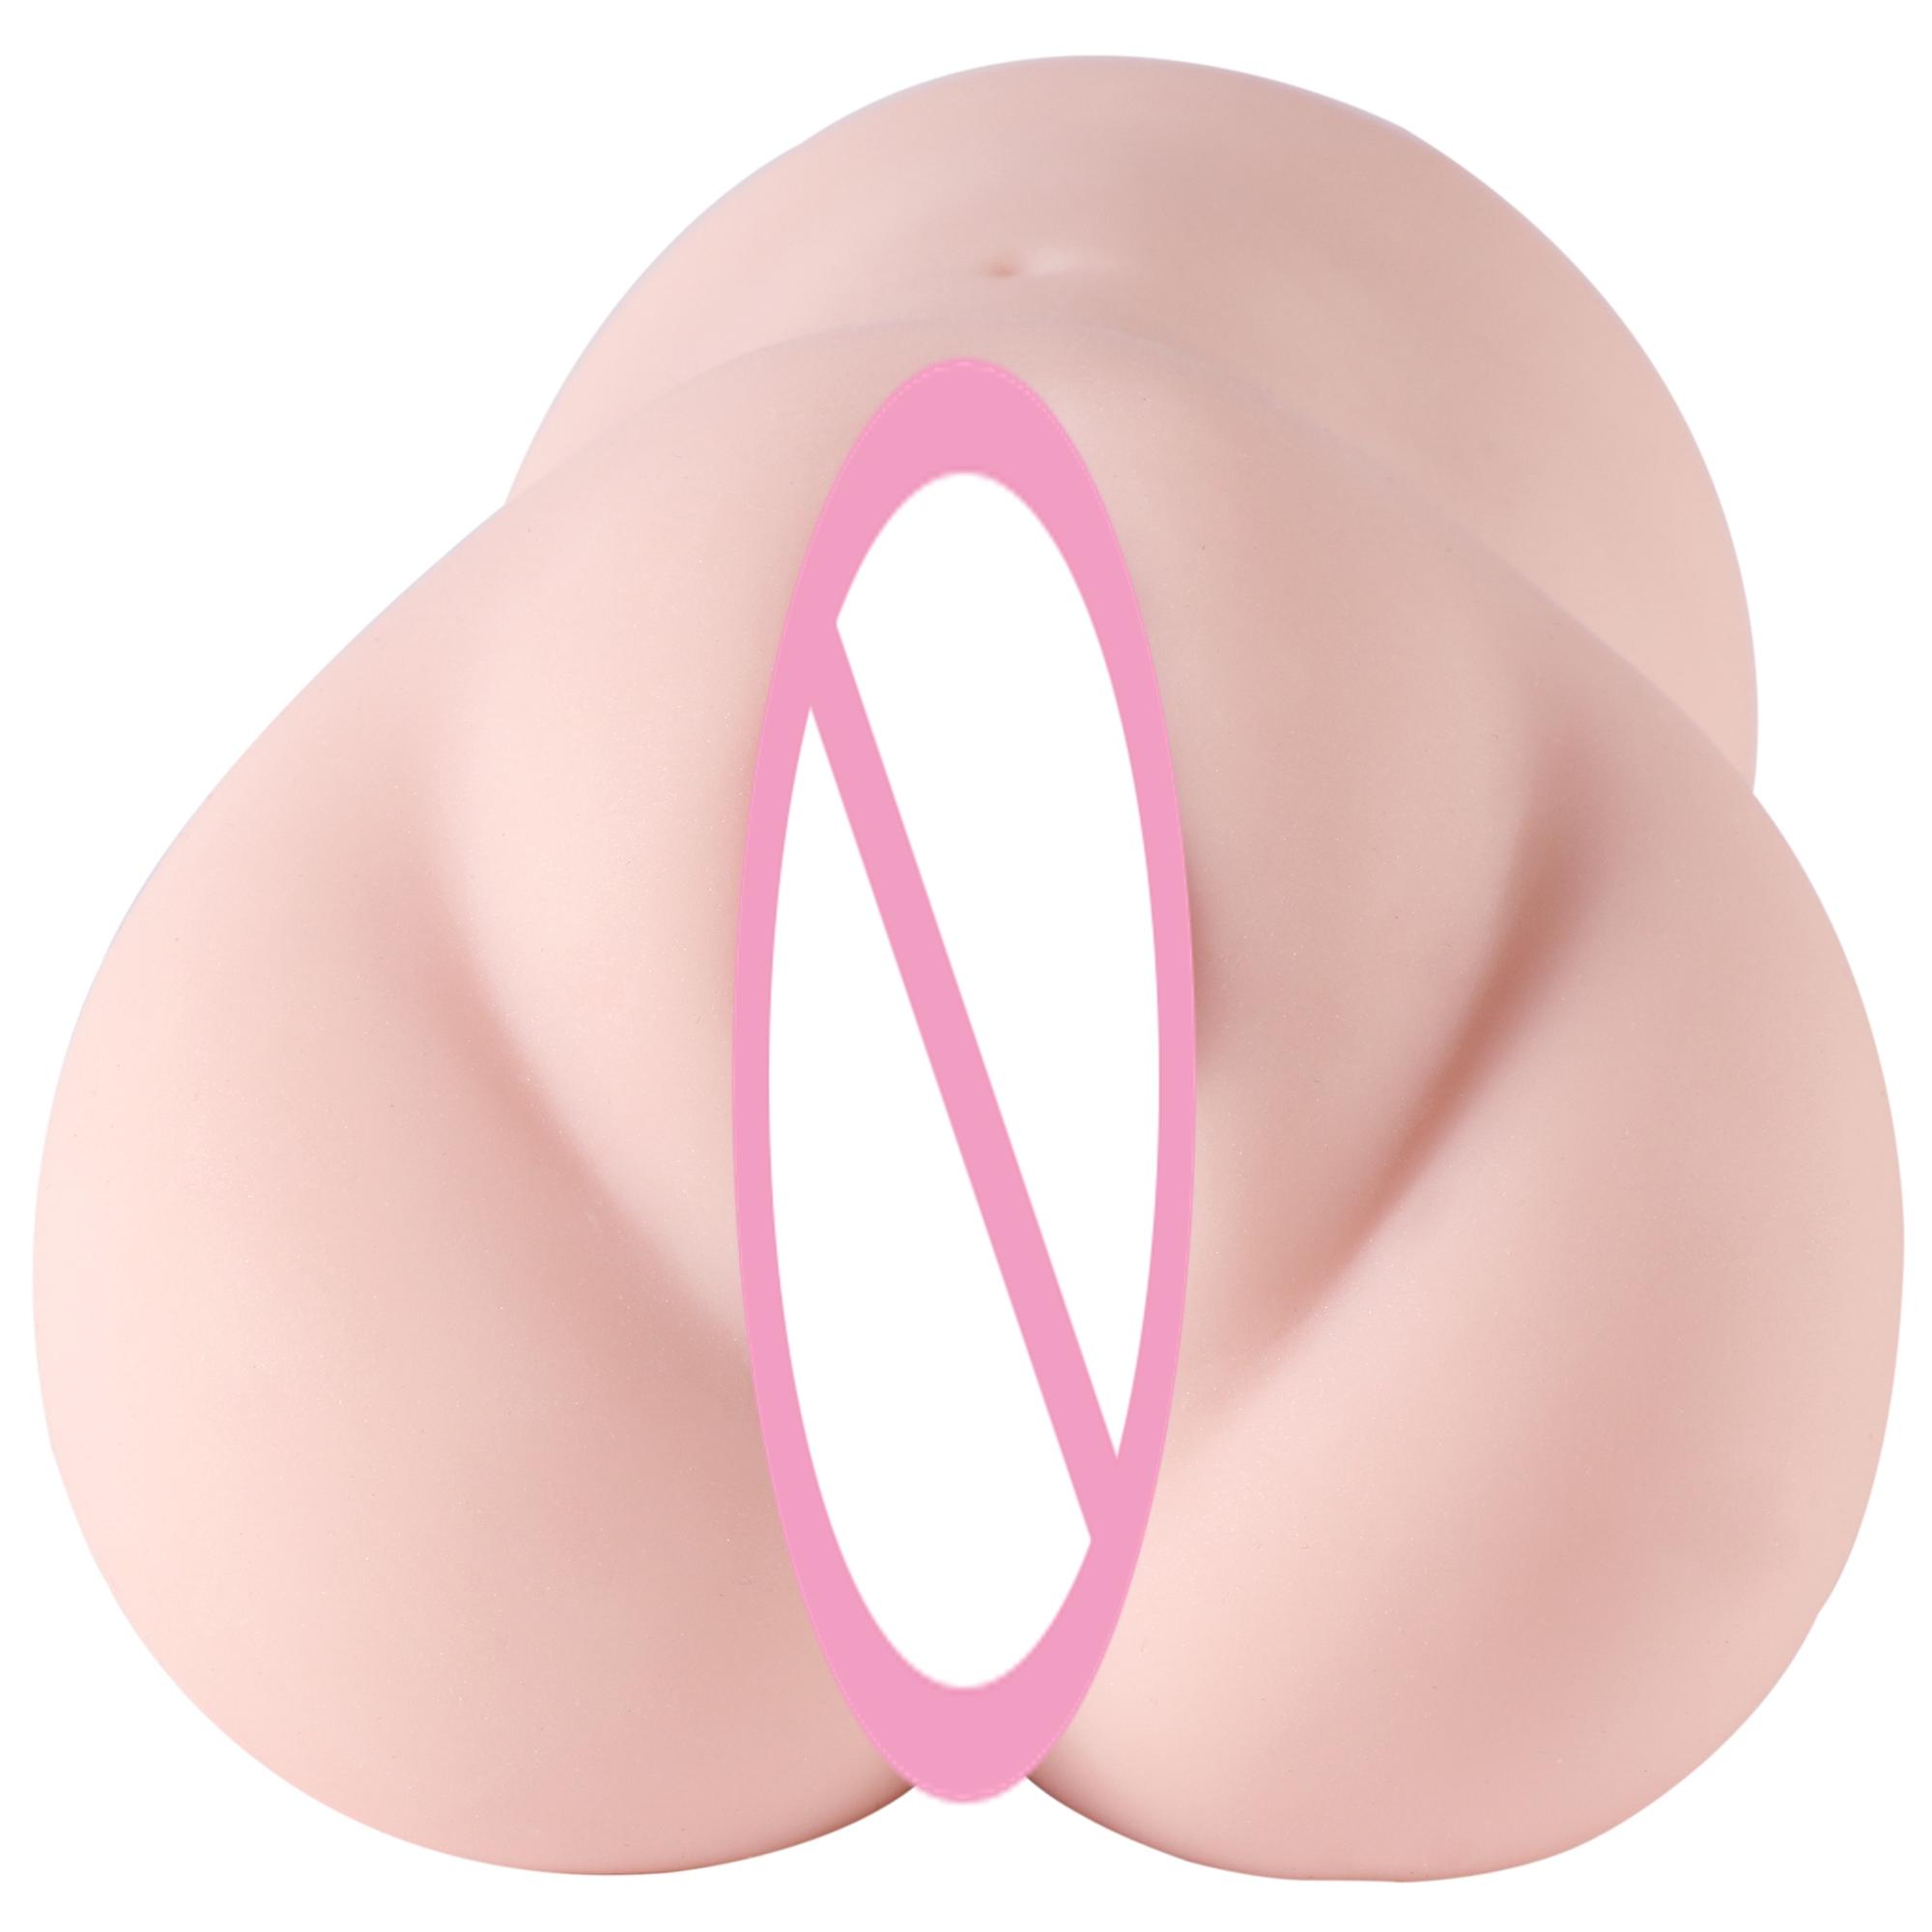  Soft Real Sex Doll With Realistic Textured Tight Anus Masturbator And Mouth Vagina Deep Throat Oral Adult Sex Toys For Men